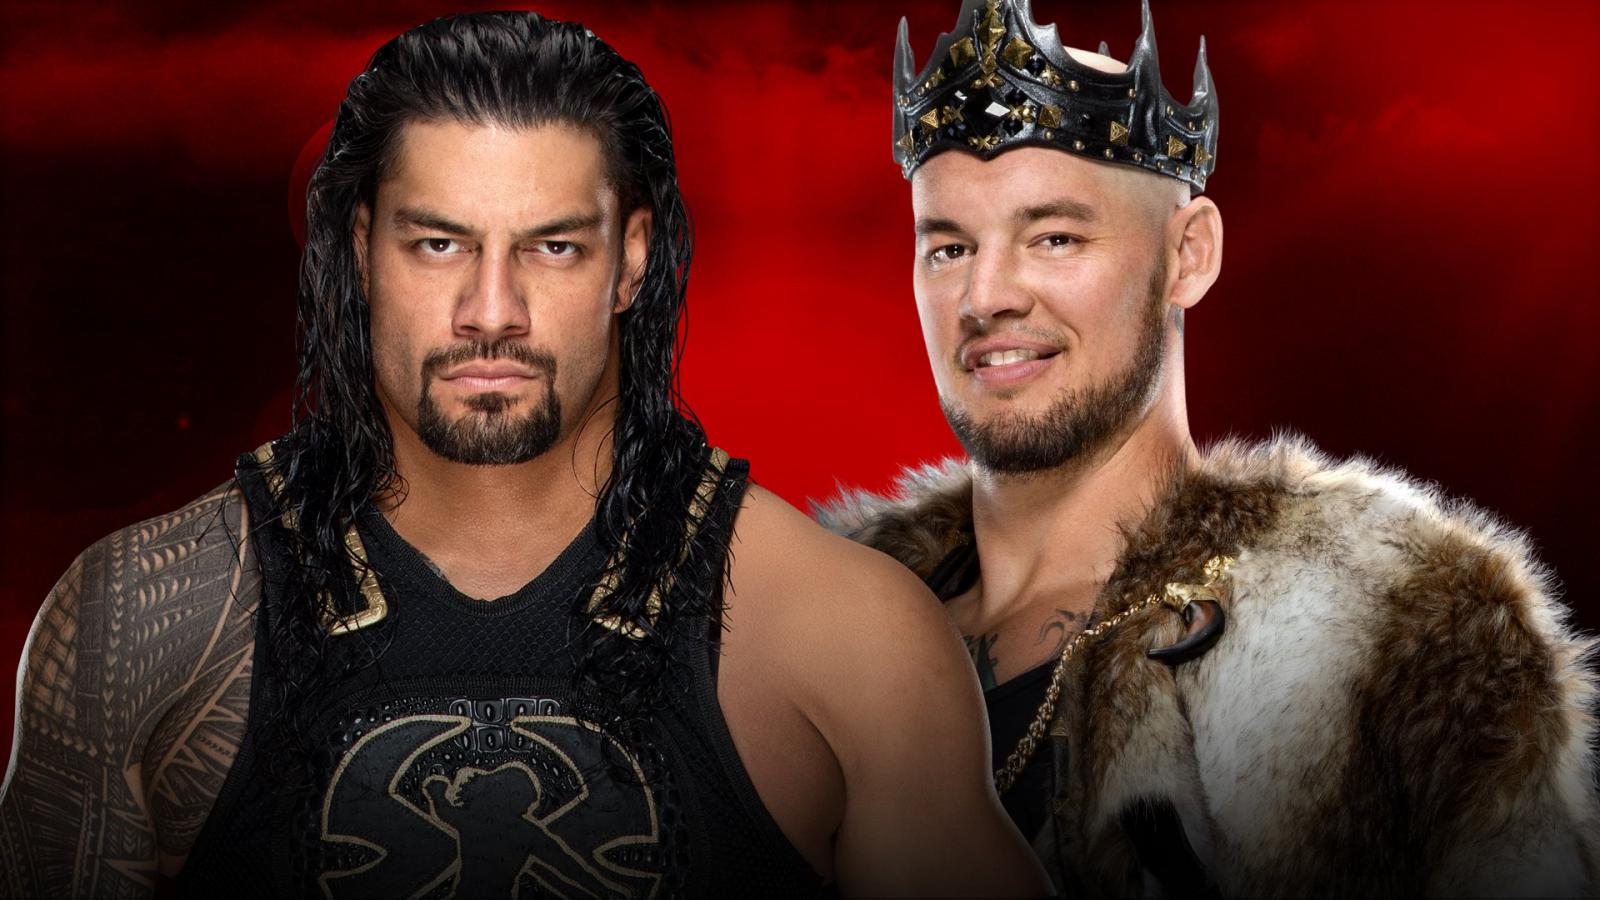 Falls Count Anywhere Stipulation Set For Reigns Corbin At Royal Rumble